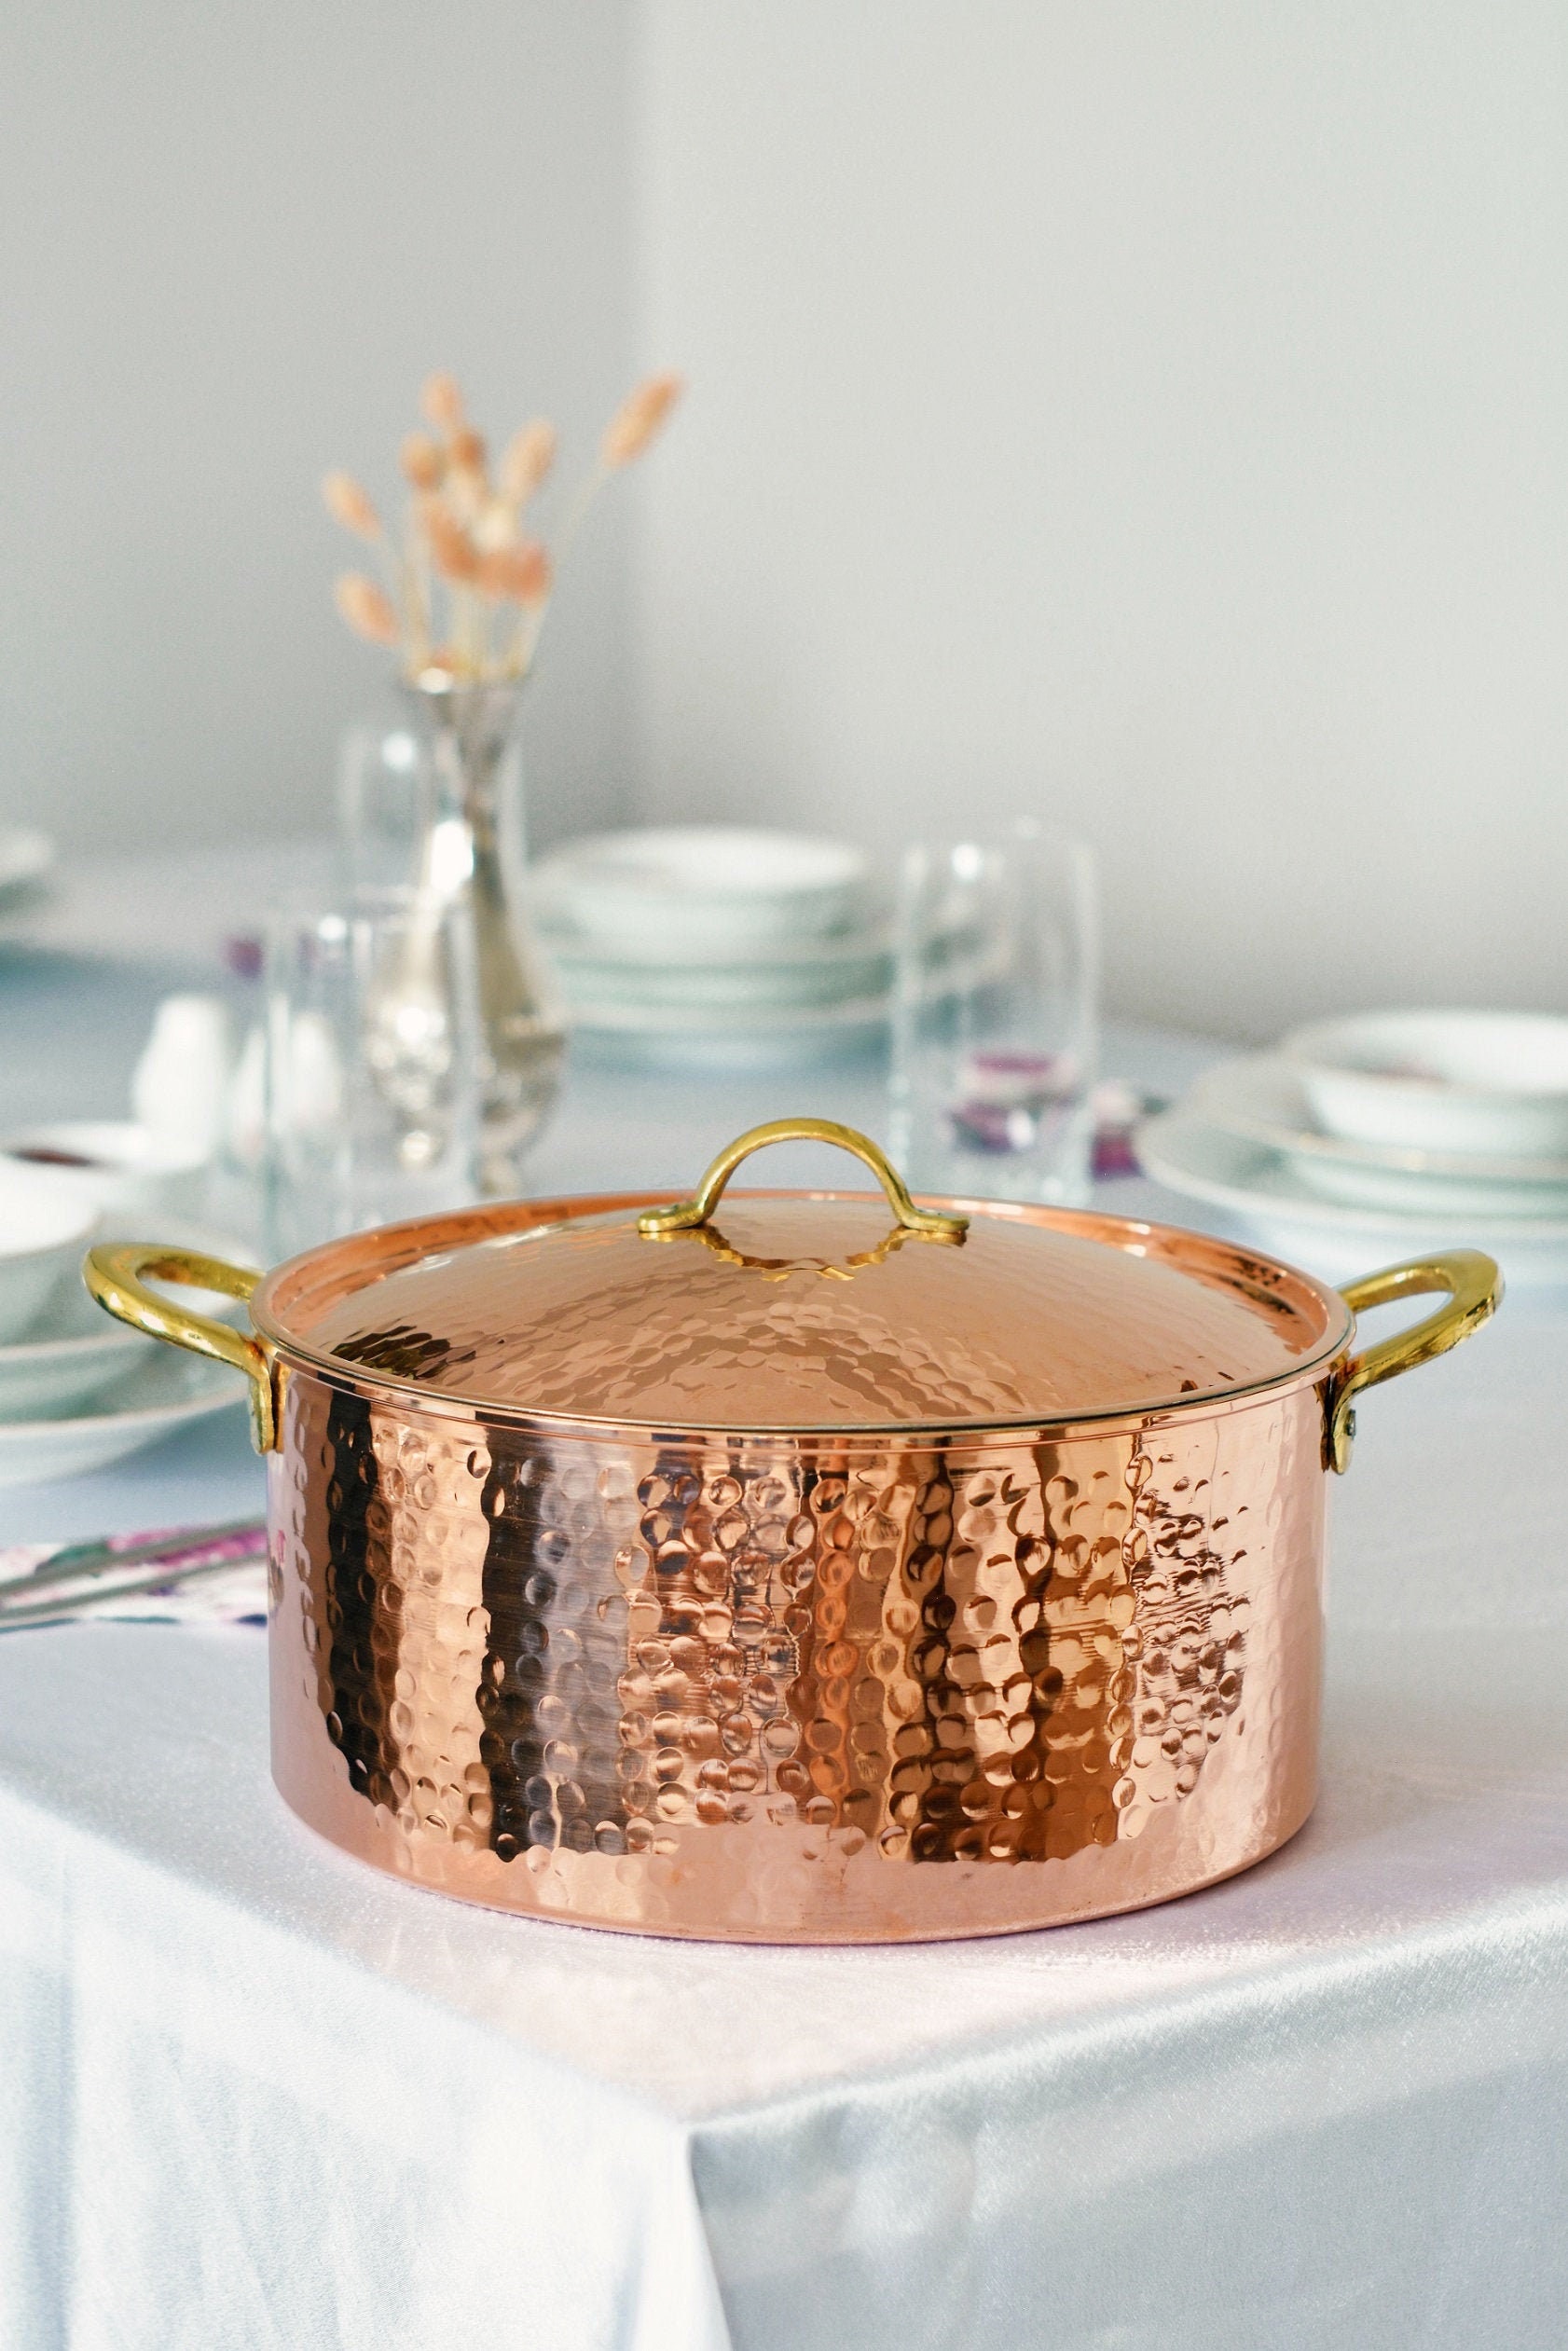 Styled Settings Copper Cooking Utensils for Cooking/Serving, Rose Gold Kitchen Utensils -Stainless Steel Copper Serving Utensils Set 5